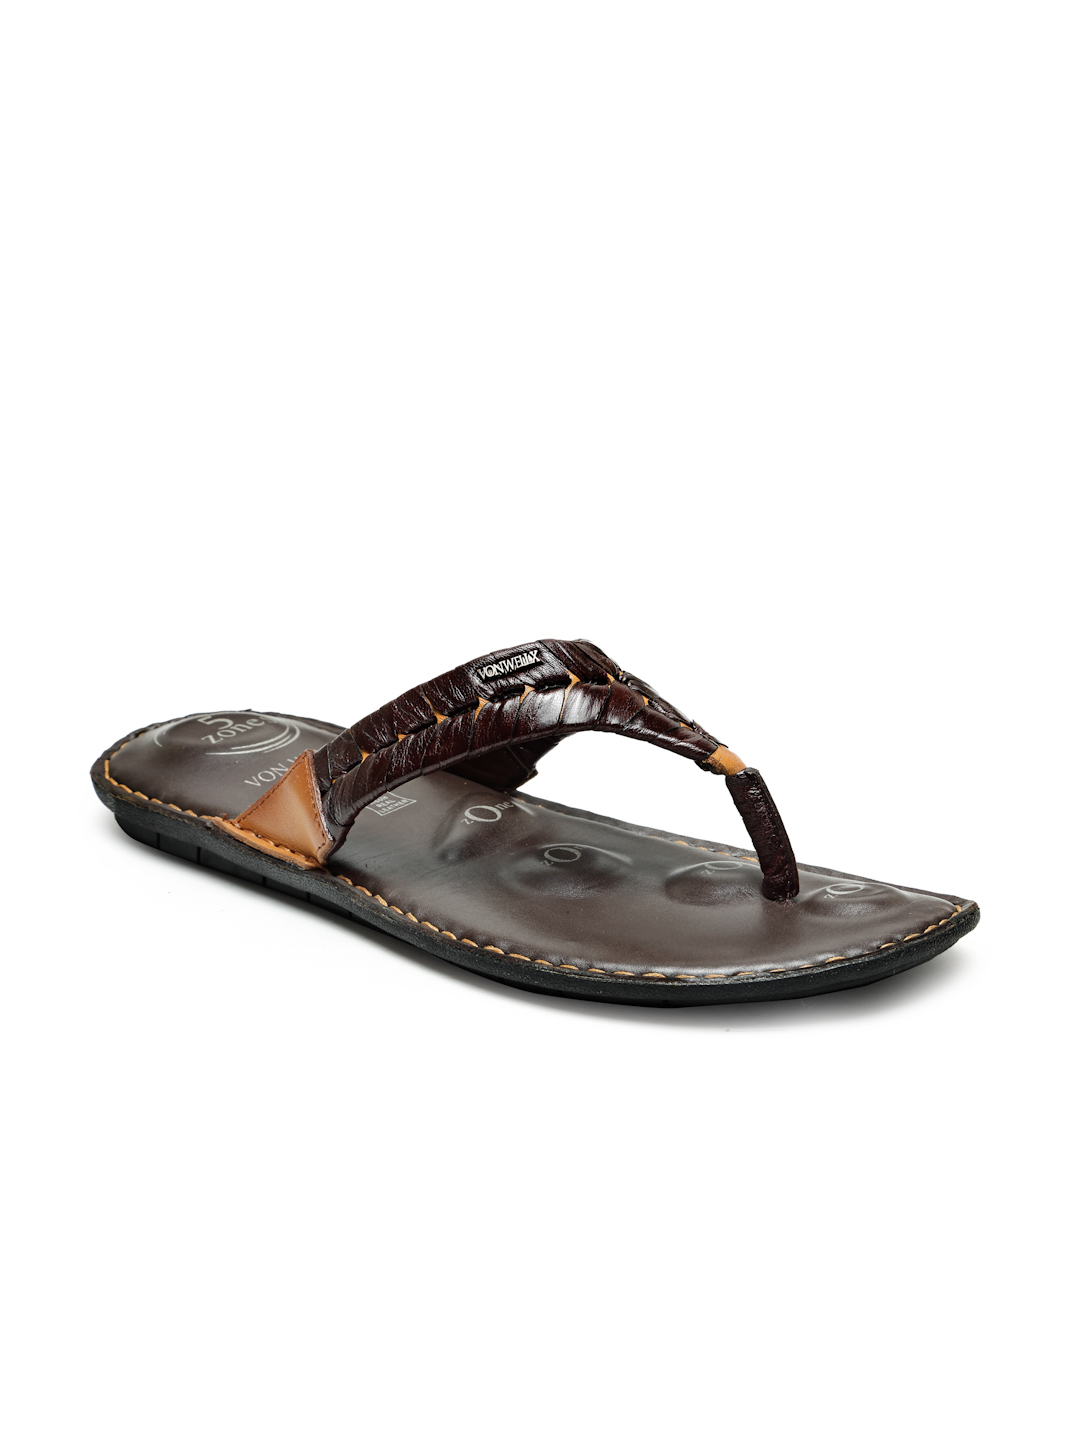 Buy Von Wellx Germany Comfort Men's Tan Slippers Alonso Online in Galle